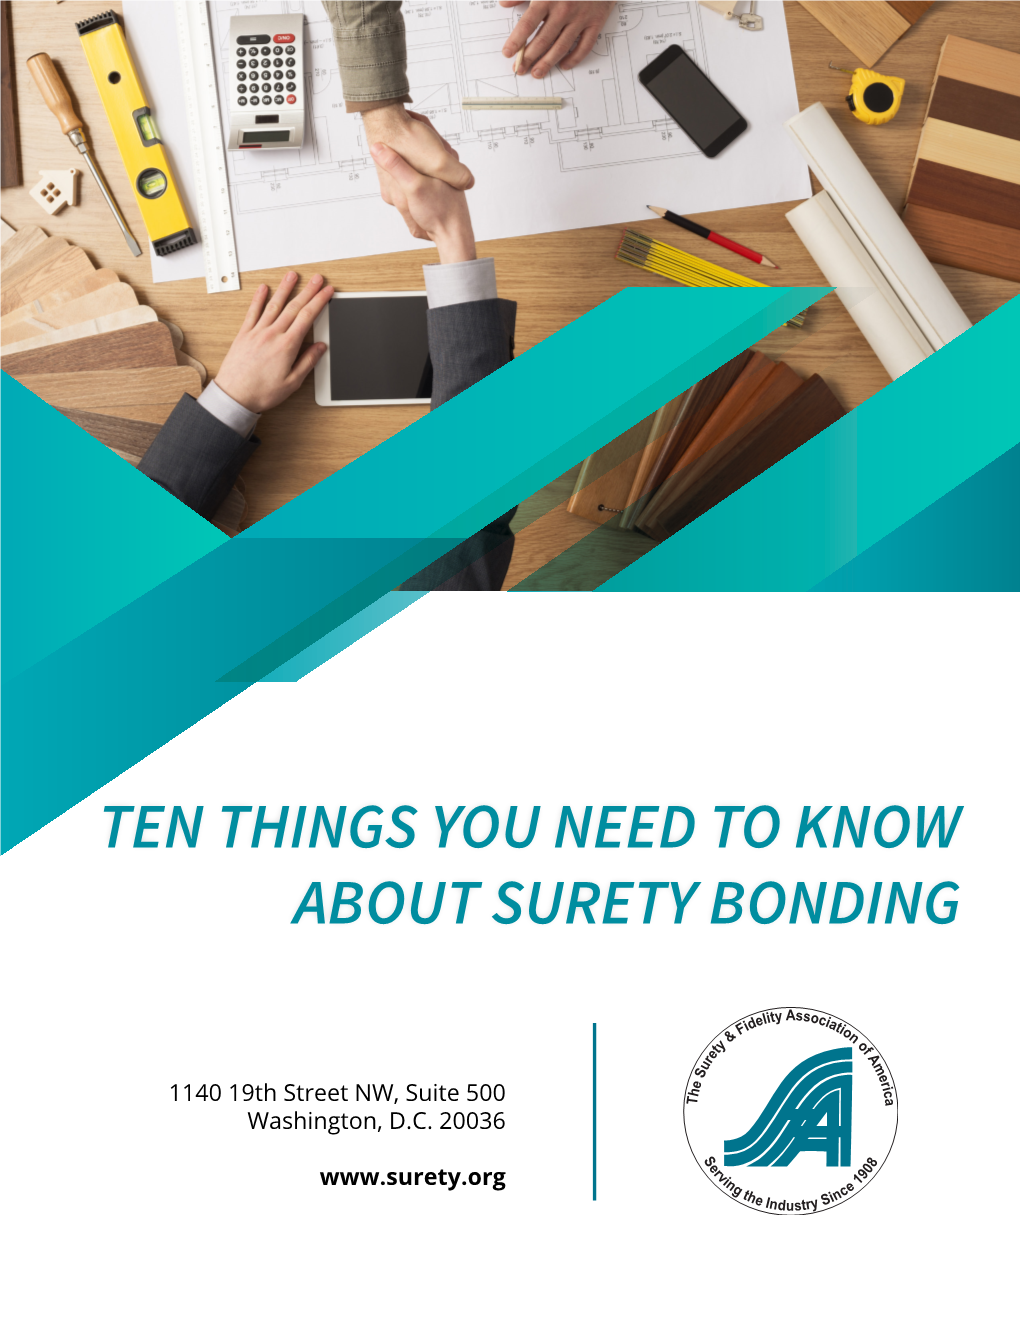 Ten Things You Need to Know About Surety Bonding